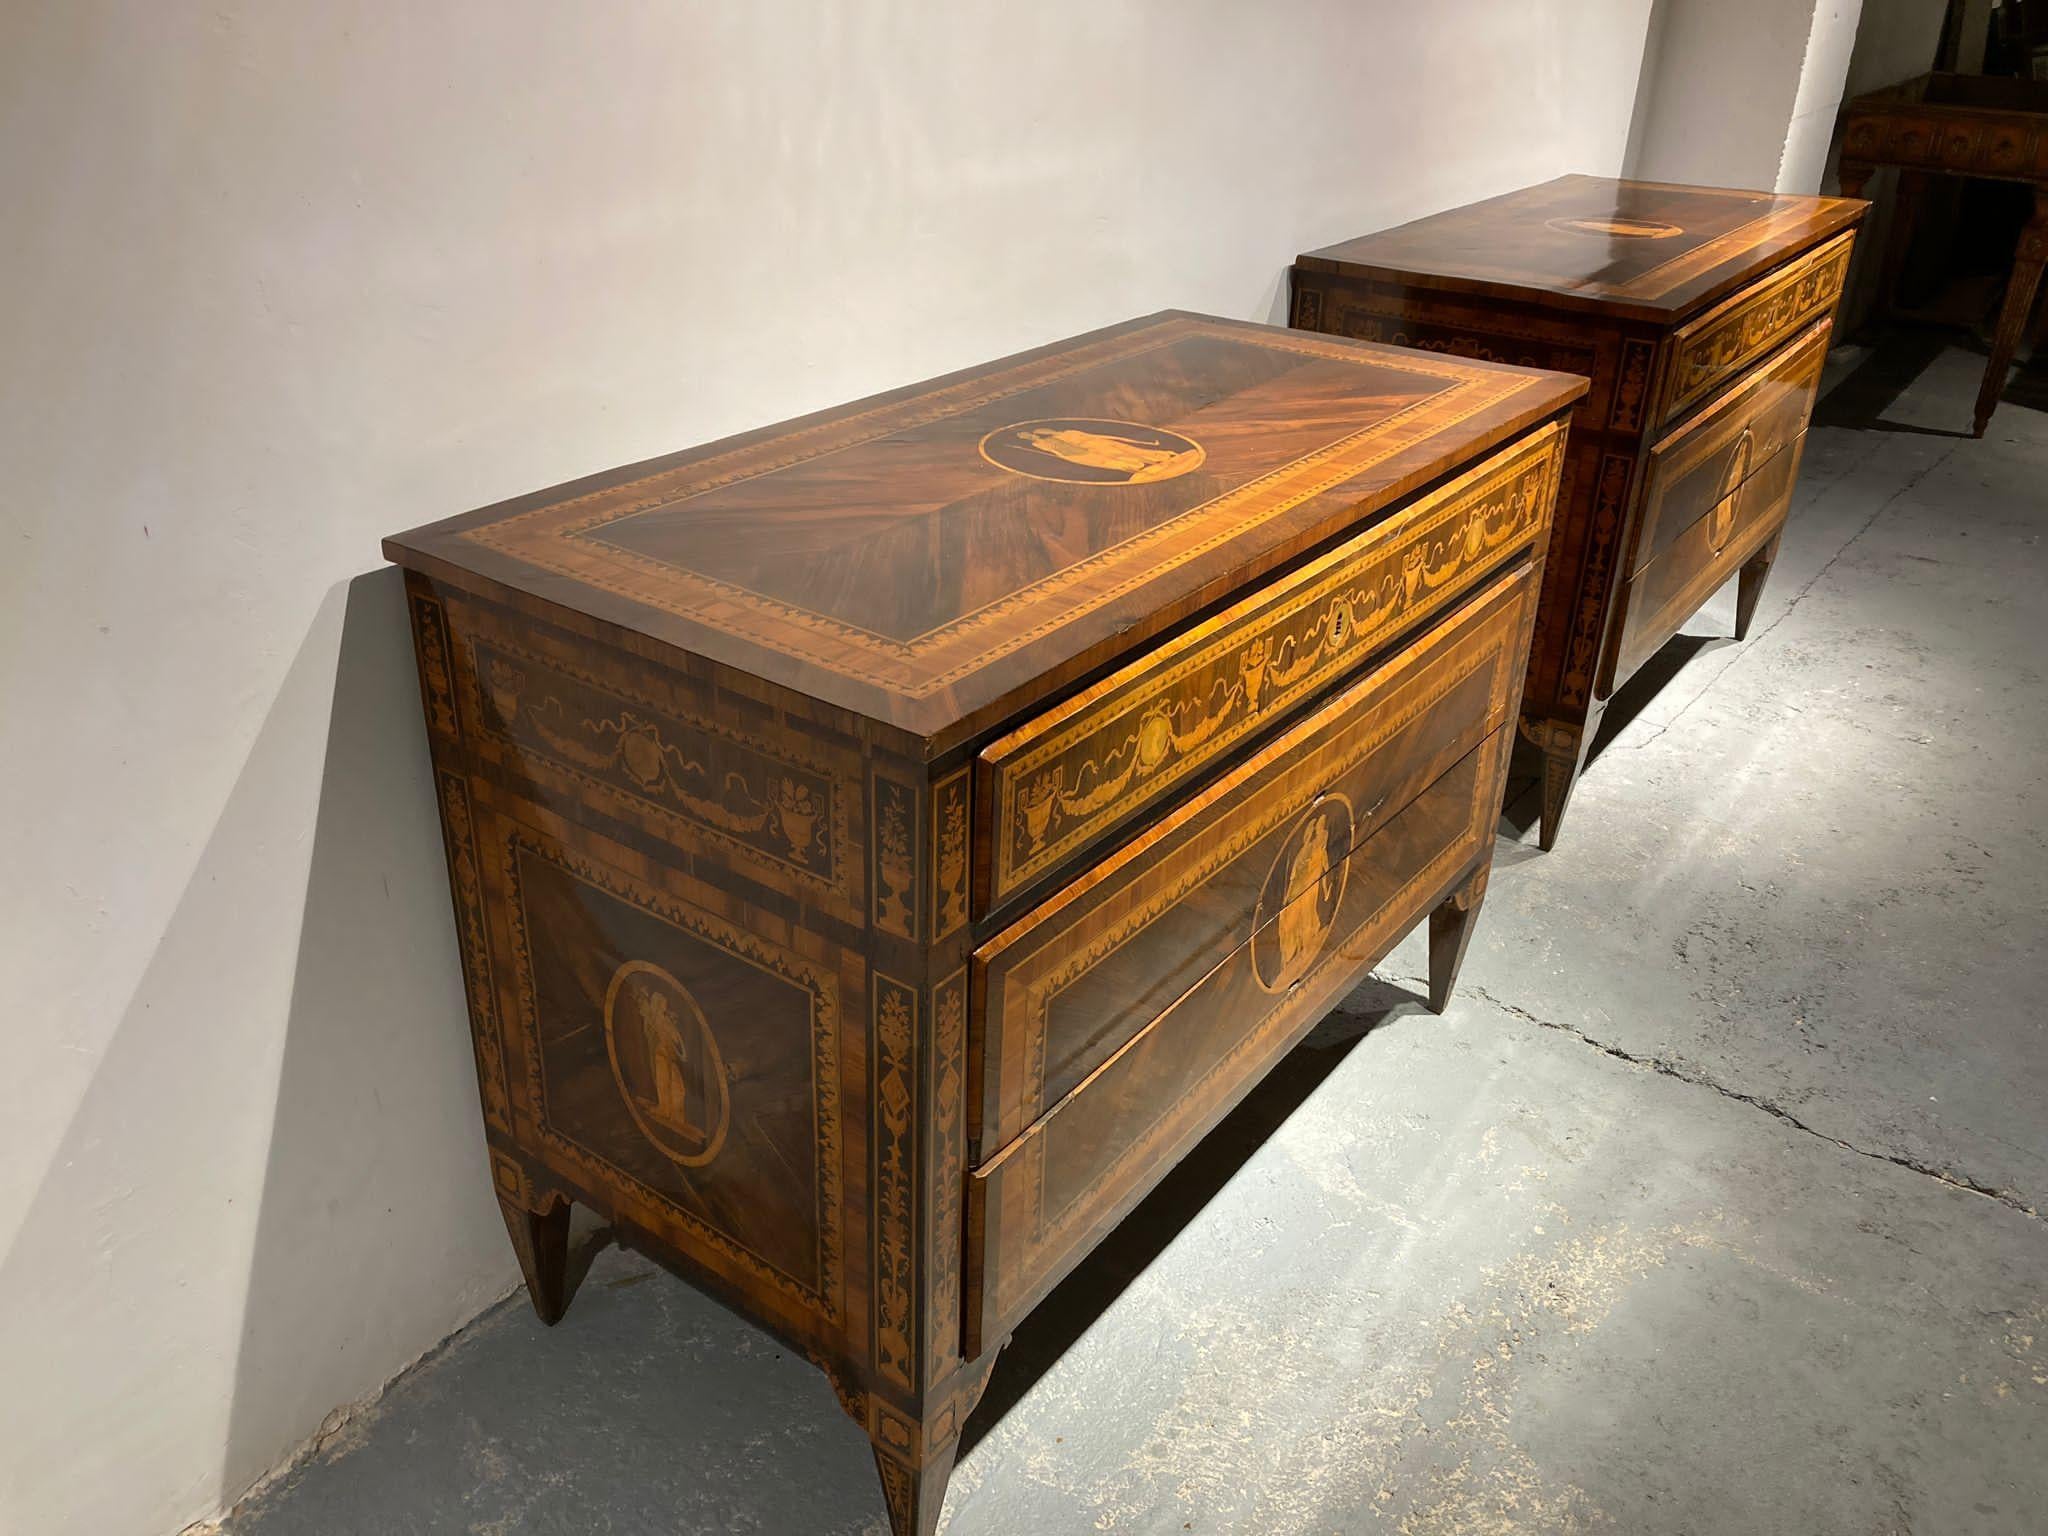 Extraordinary pair Italian Louis XVI commode chest to late 18th century, realized of Giuseppe Maggiolini, the famous Italian cabinetmaker, with extensive inlay and marquetry of multiple woods , in quite overall good condition.
This Northern Italian